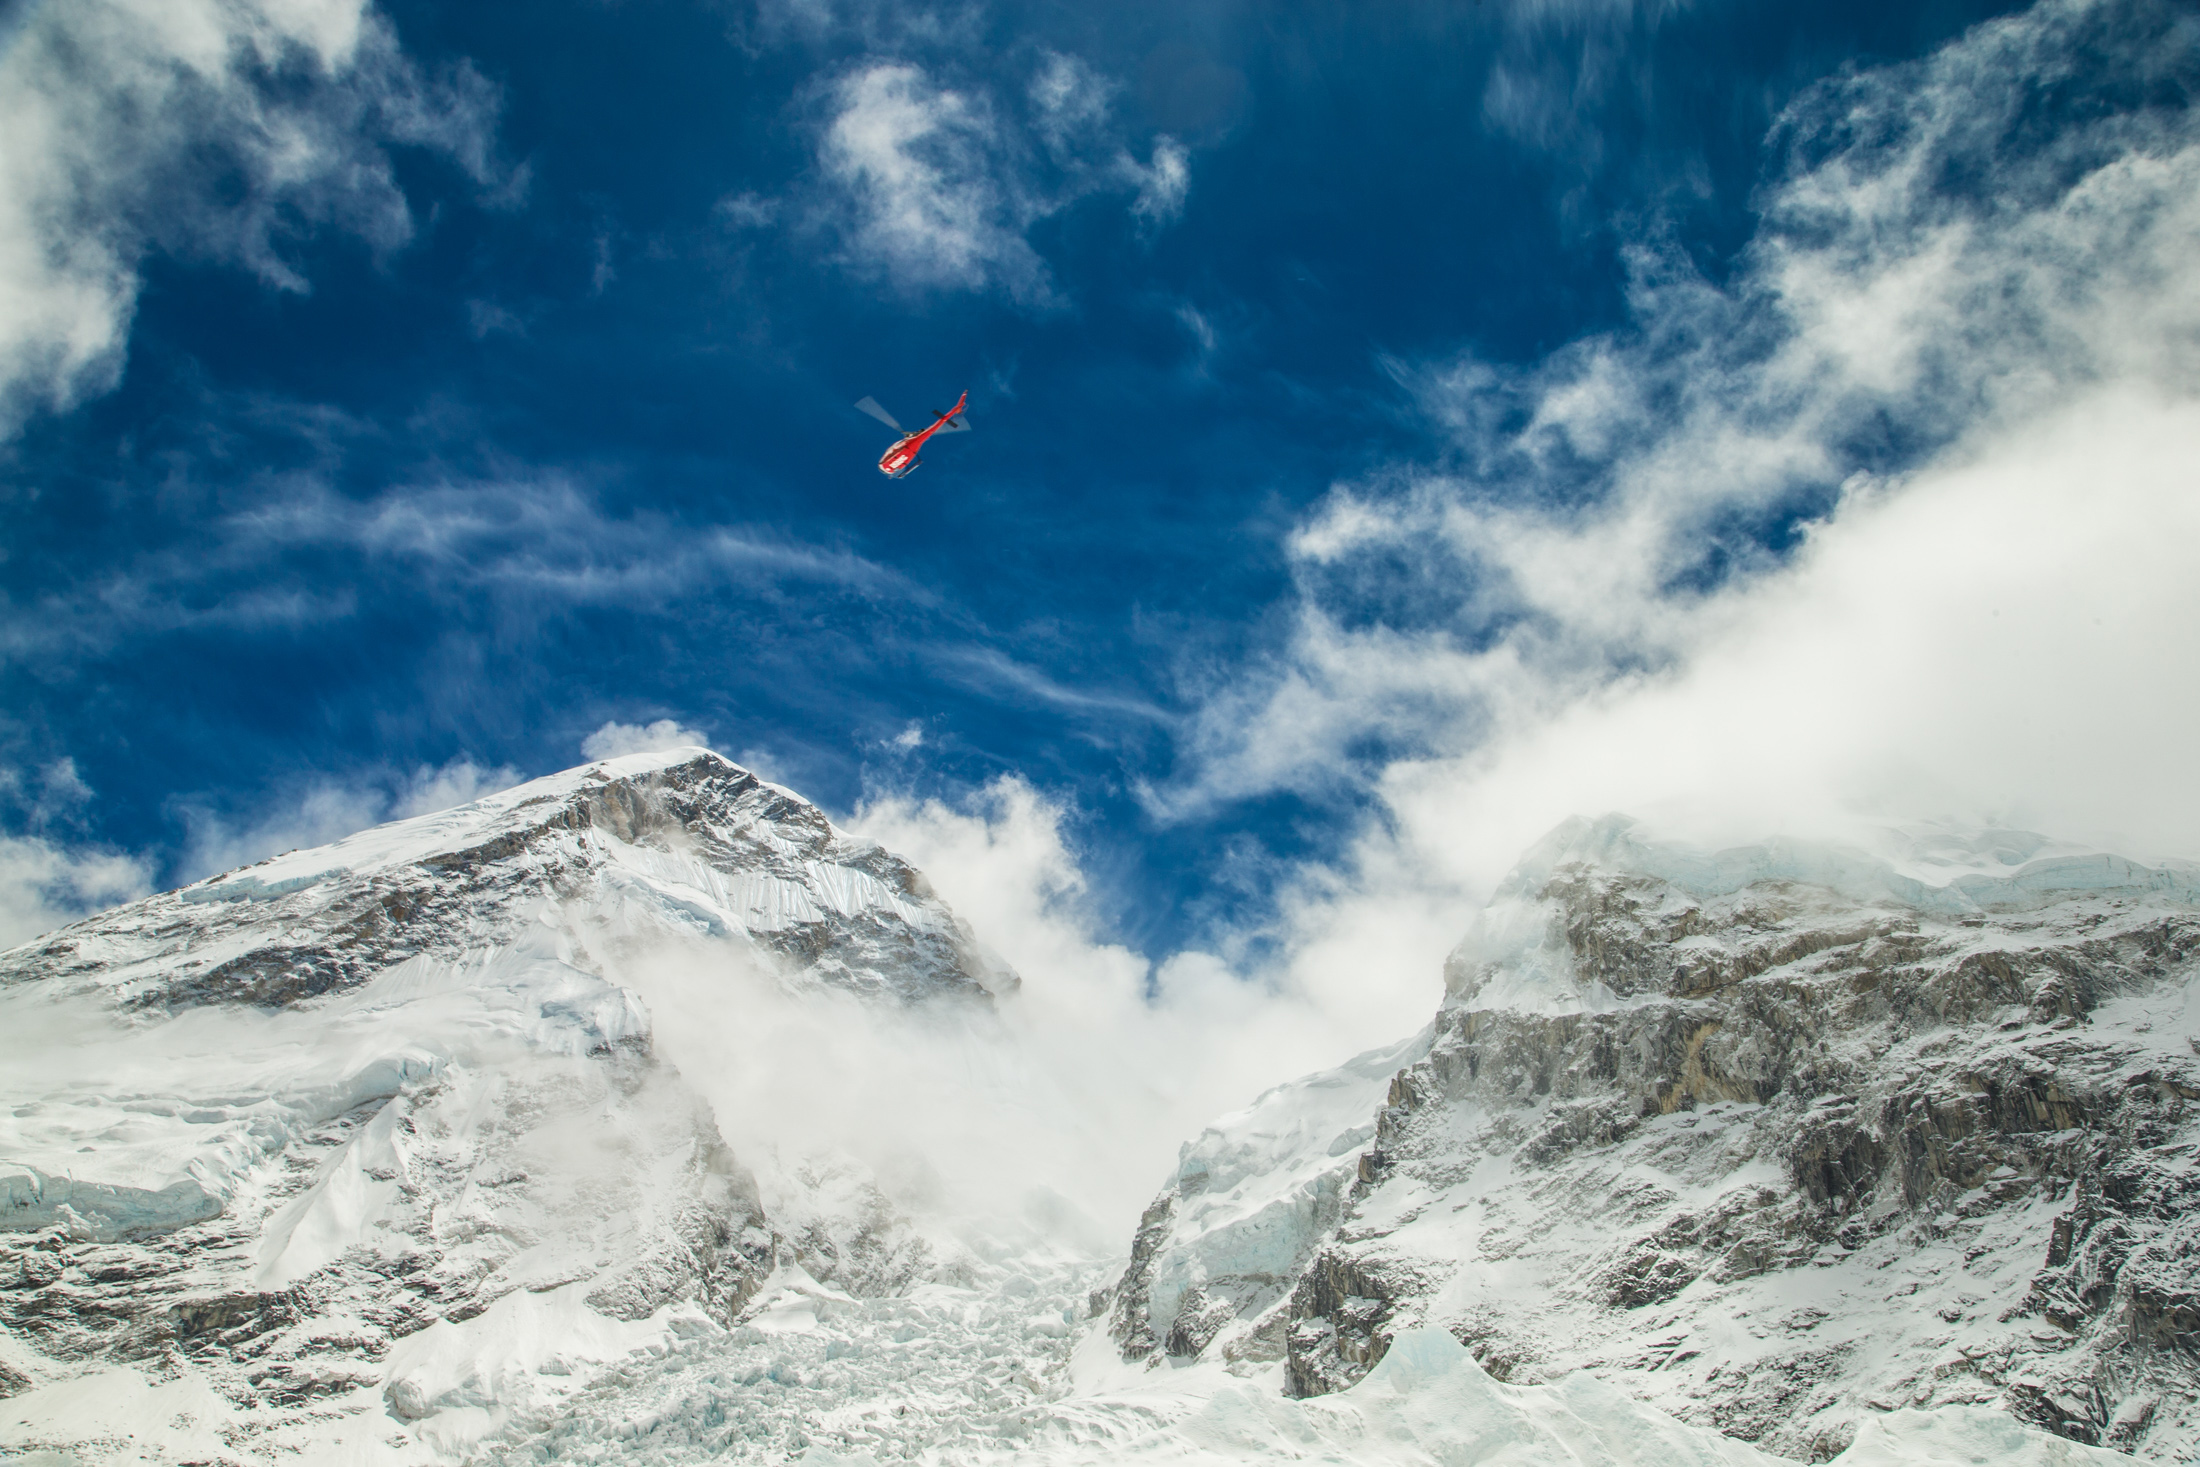 PHOTO: A photographer for 6 Summits Challenge, an international team of climbers, documented the destruction on Mt. Everest following an earthquake and avalanche on April 25, 2015.